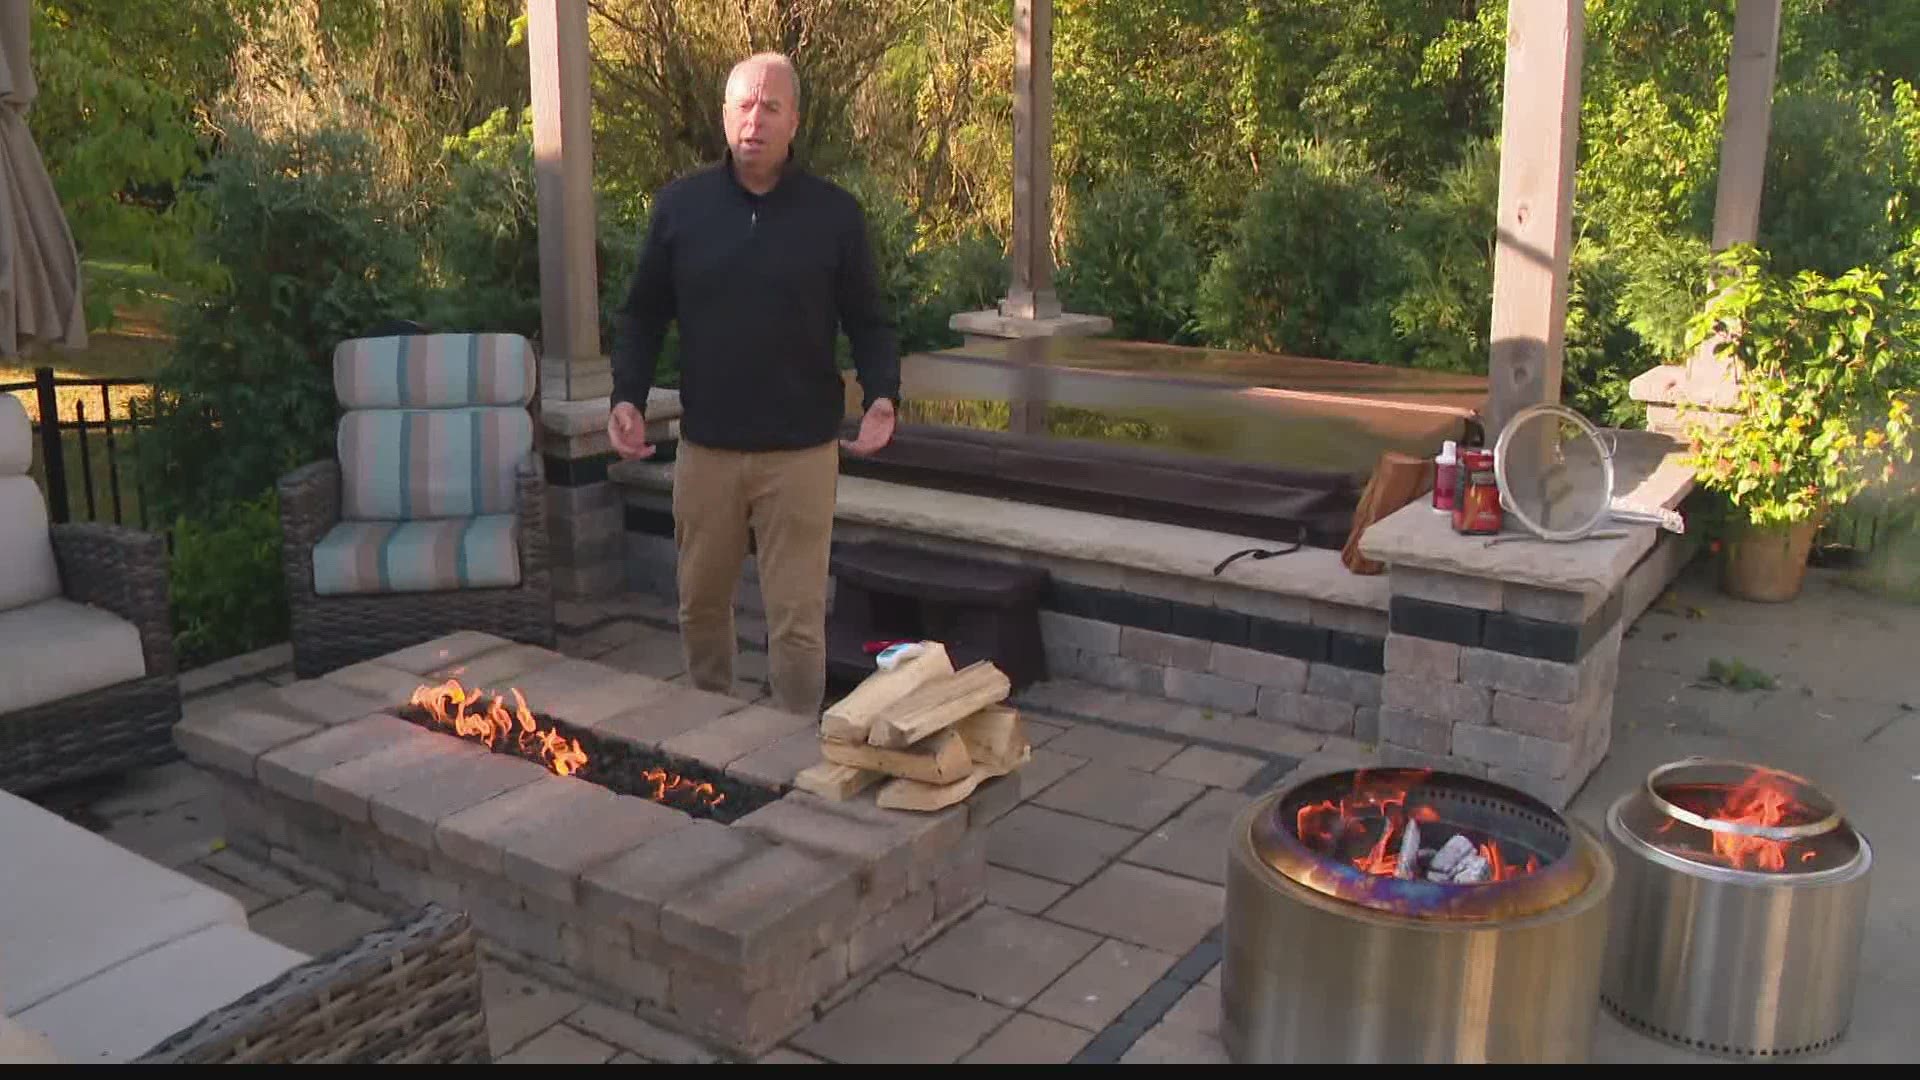 Fire pits help you extend outdoor time later into fall, and Pat shares what to consider if you're buying or building one.